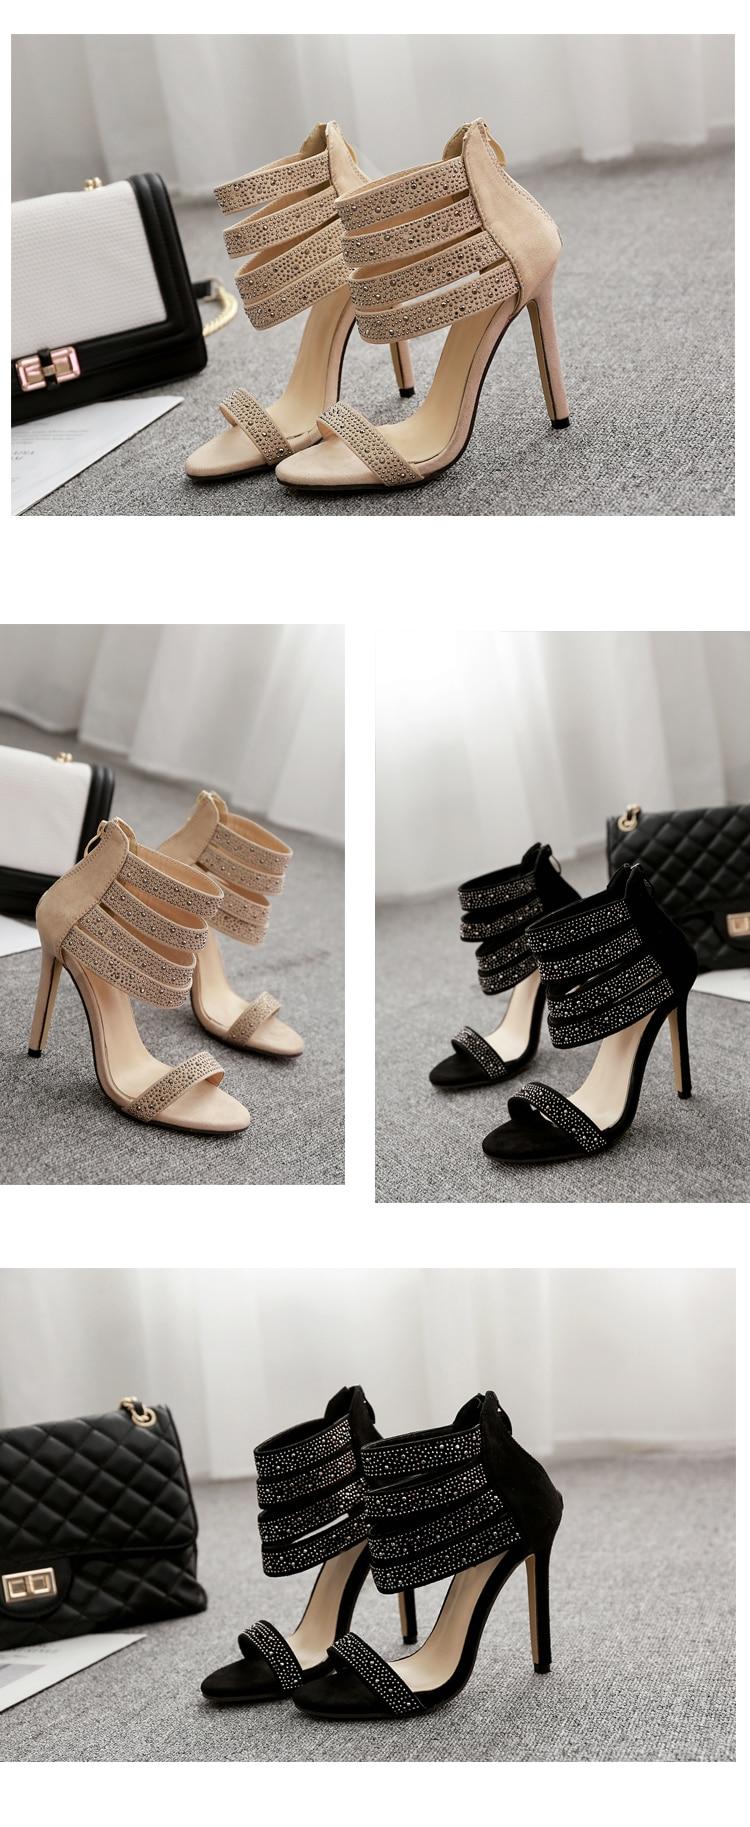 Aneikeh Elegant Crystal Embellished High Heel Sandals Cut-out Peep Toe Ankle Strap Dress Shoes For Women Back Zipper Cage Shoes